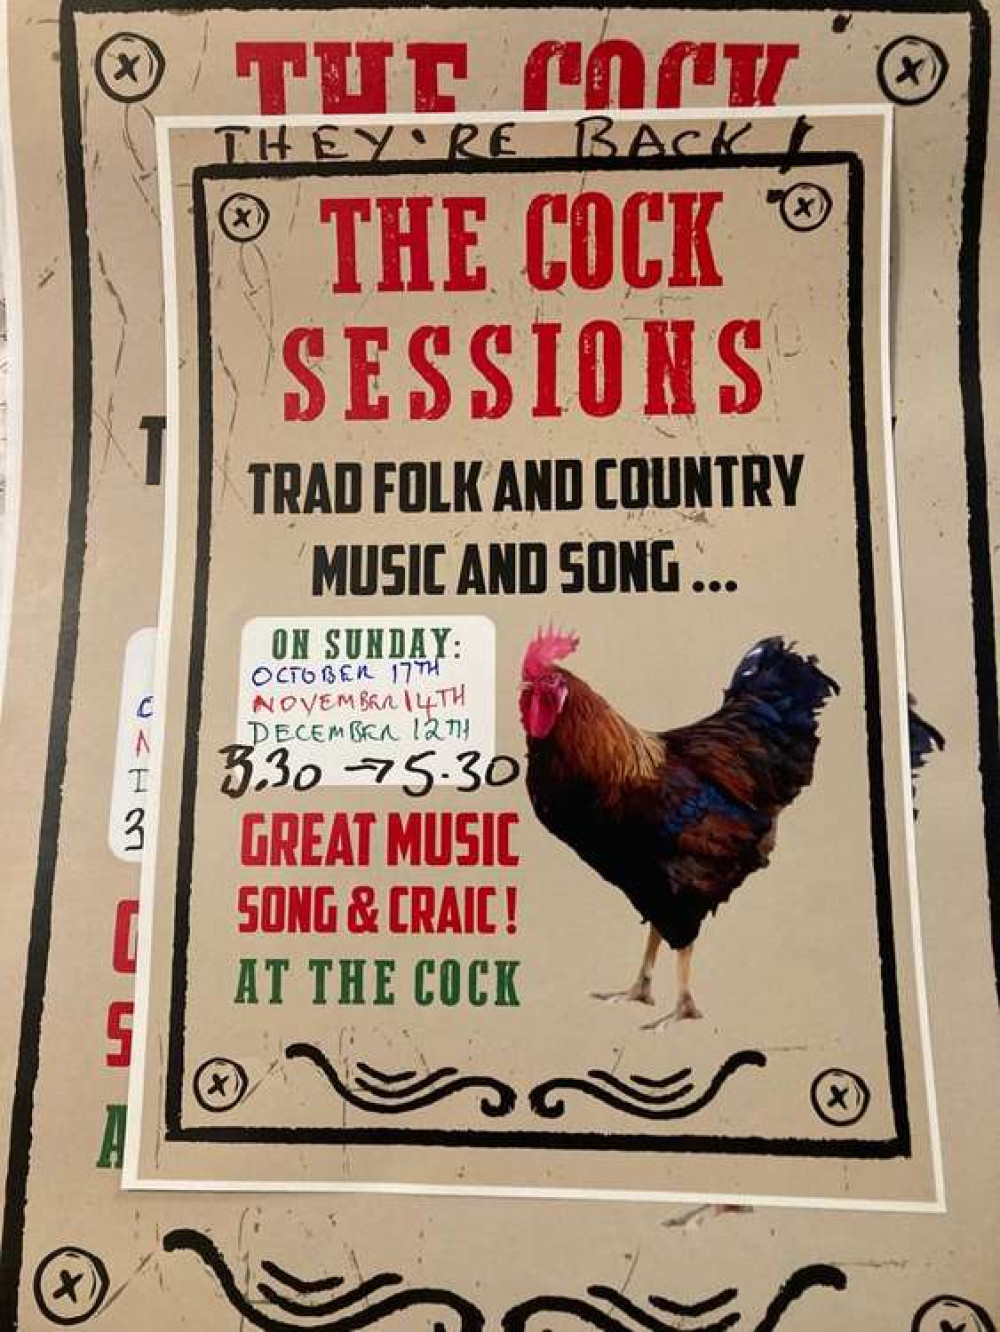 Letchworth: Get set for the Tanglers Irregulars at the Cock in Baldock